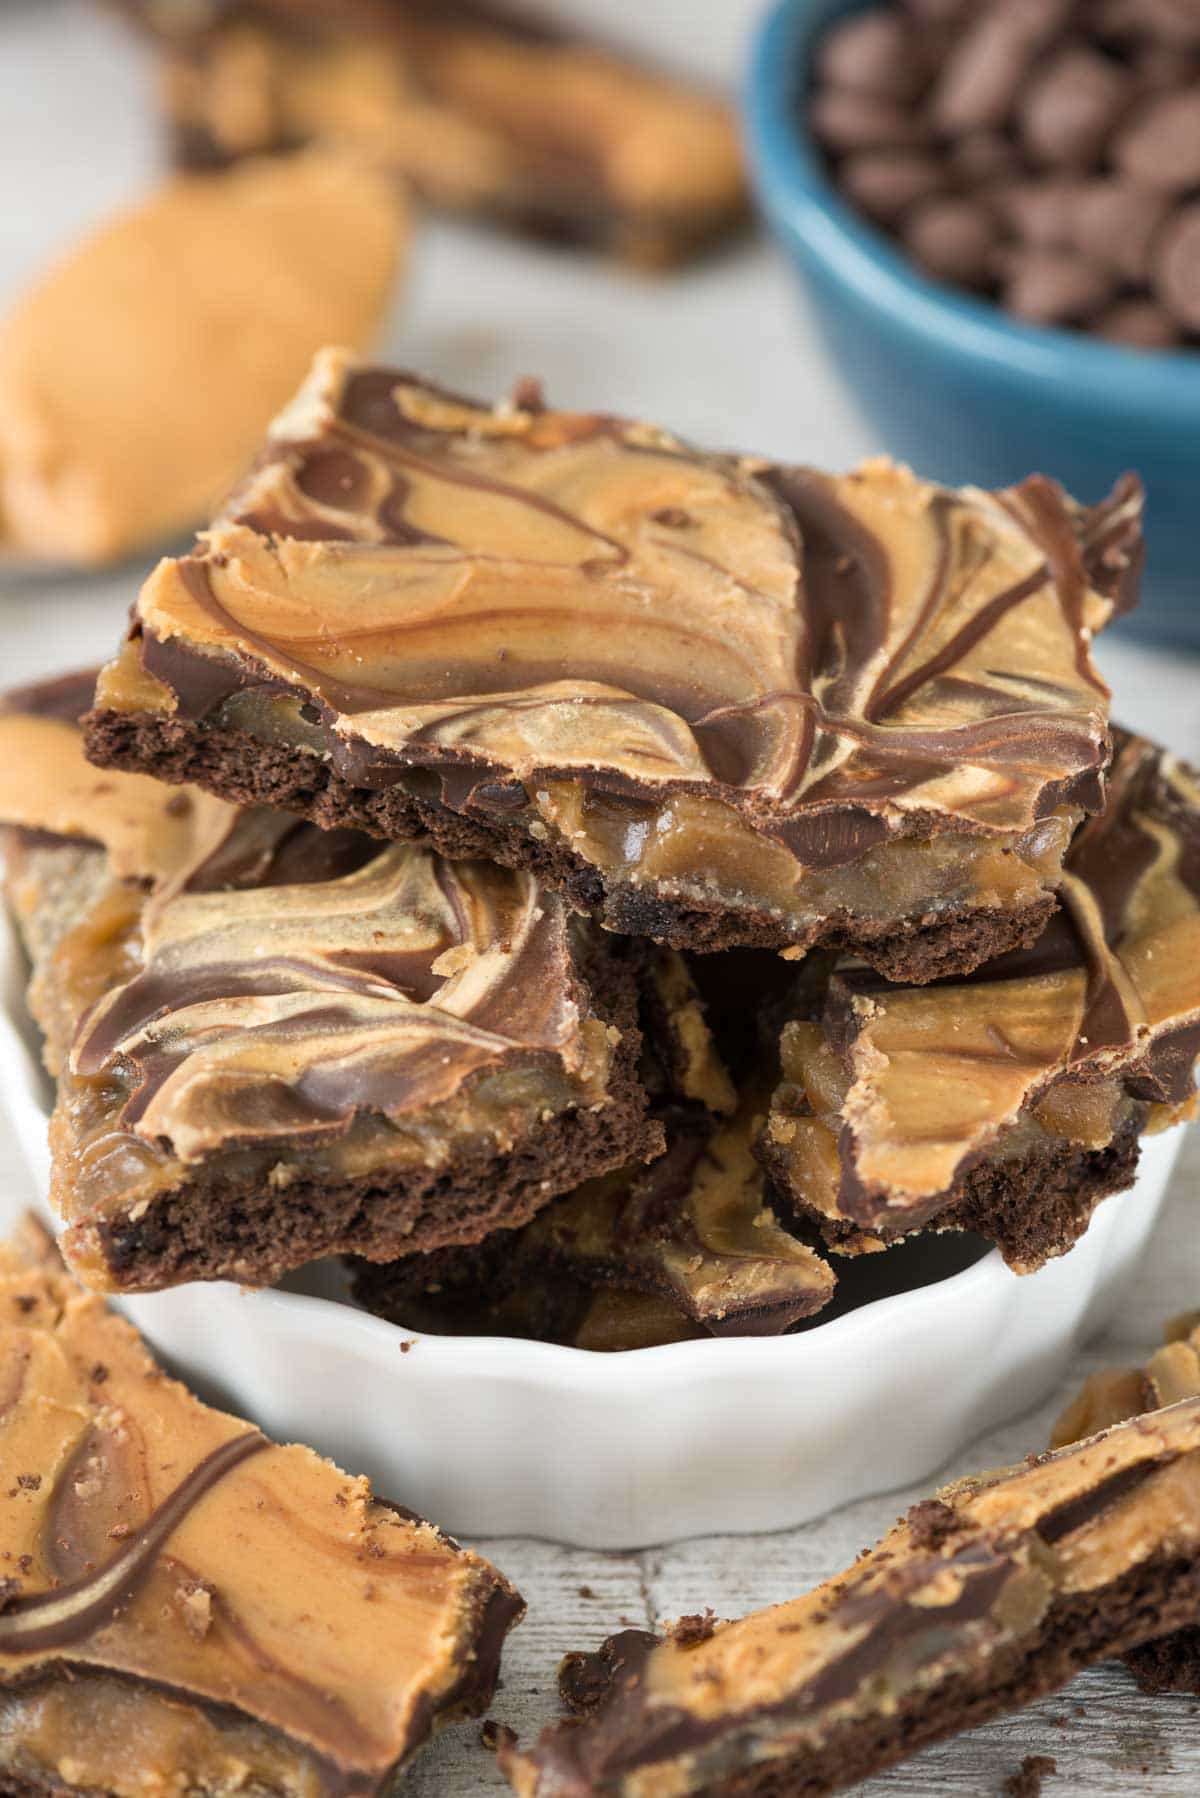 EASY Peanut Butter Chocolate Toffee Crack Bark - this is such an easy candy recipe! Toffee on top of chocolate graham crackers with chocolate chips and peanut butter.